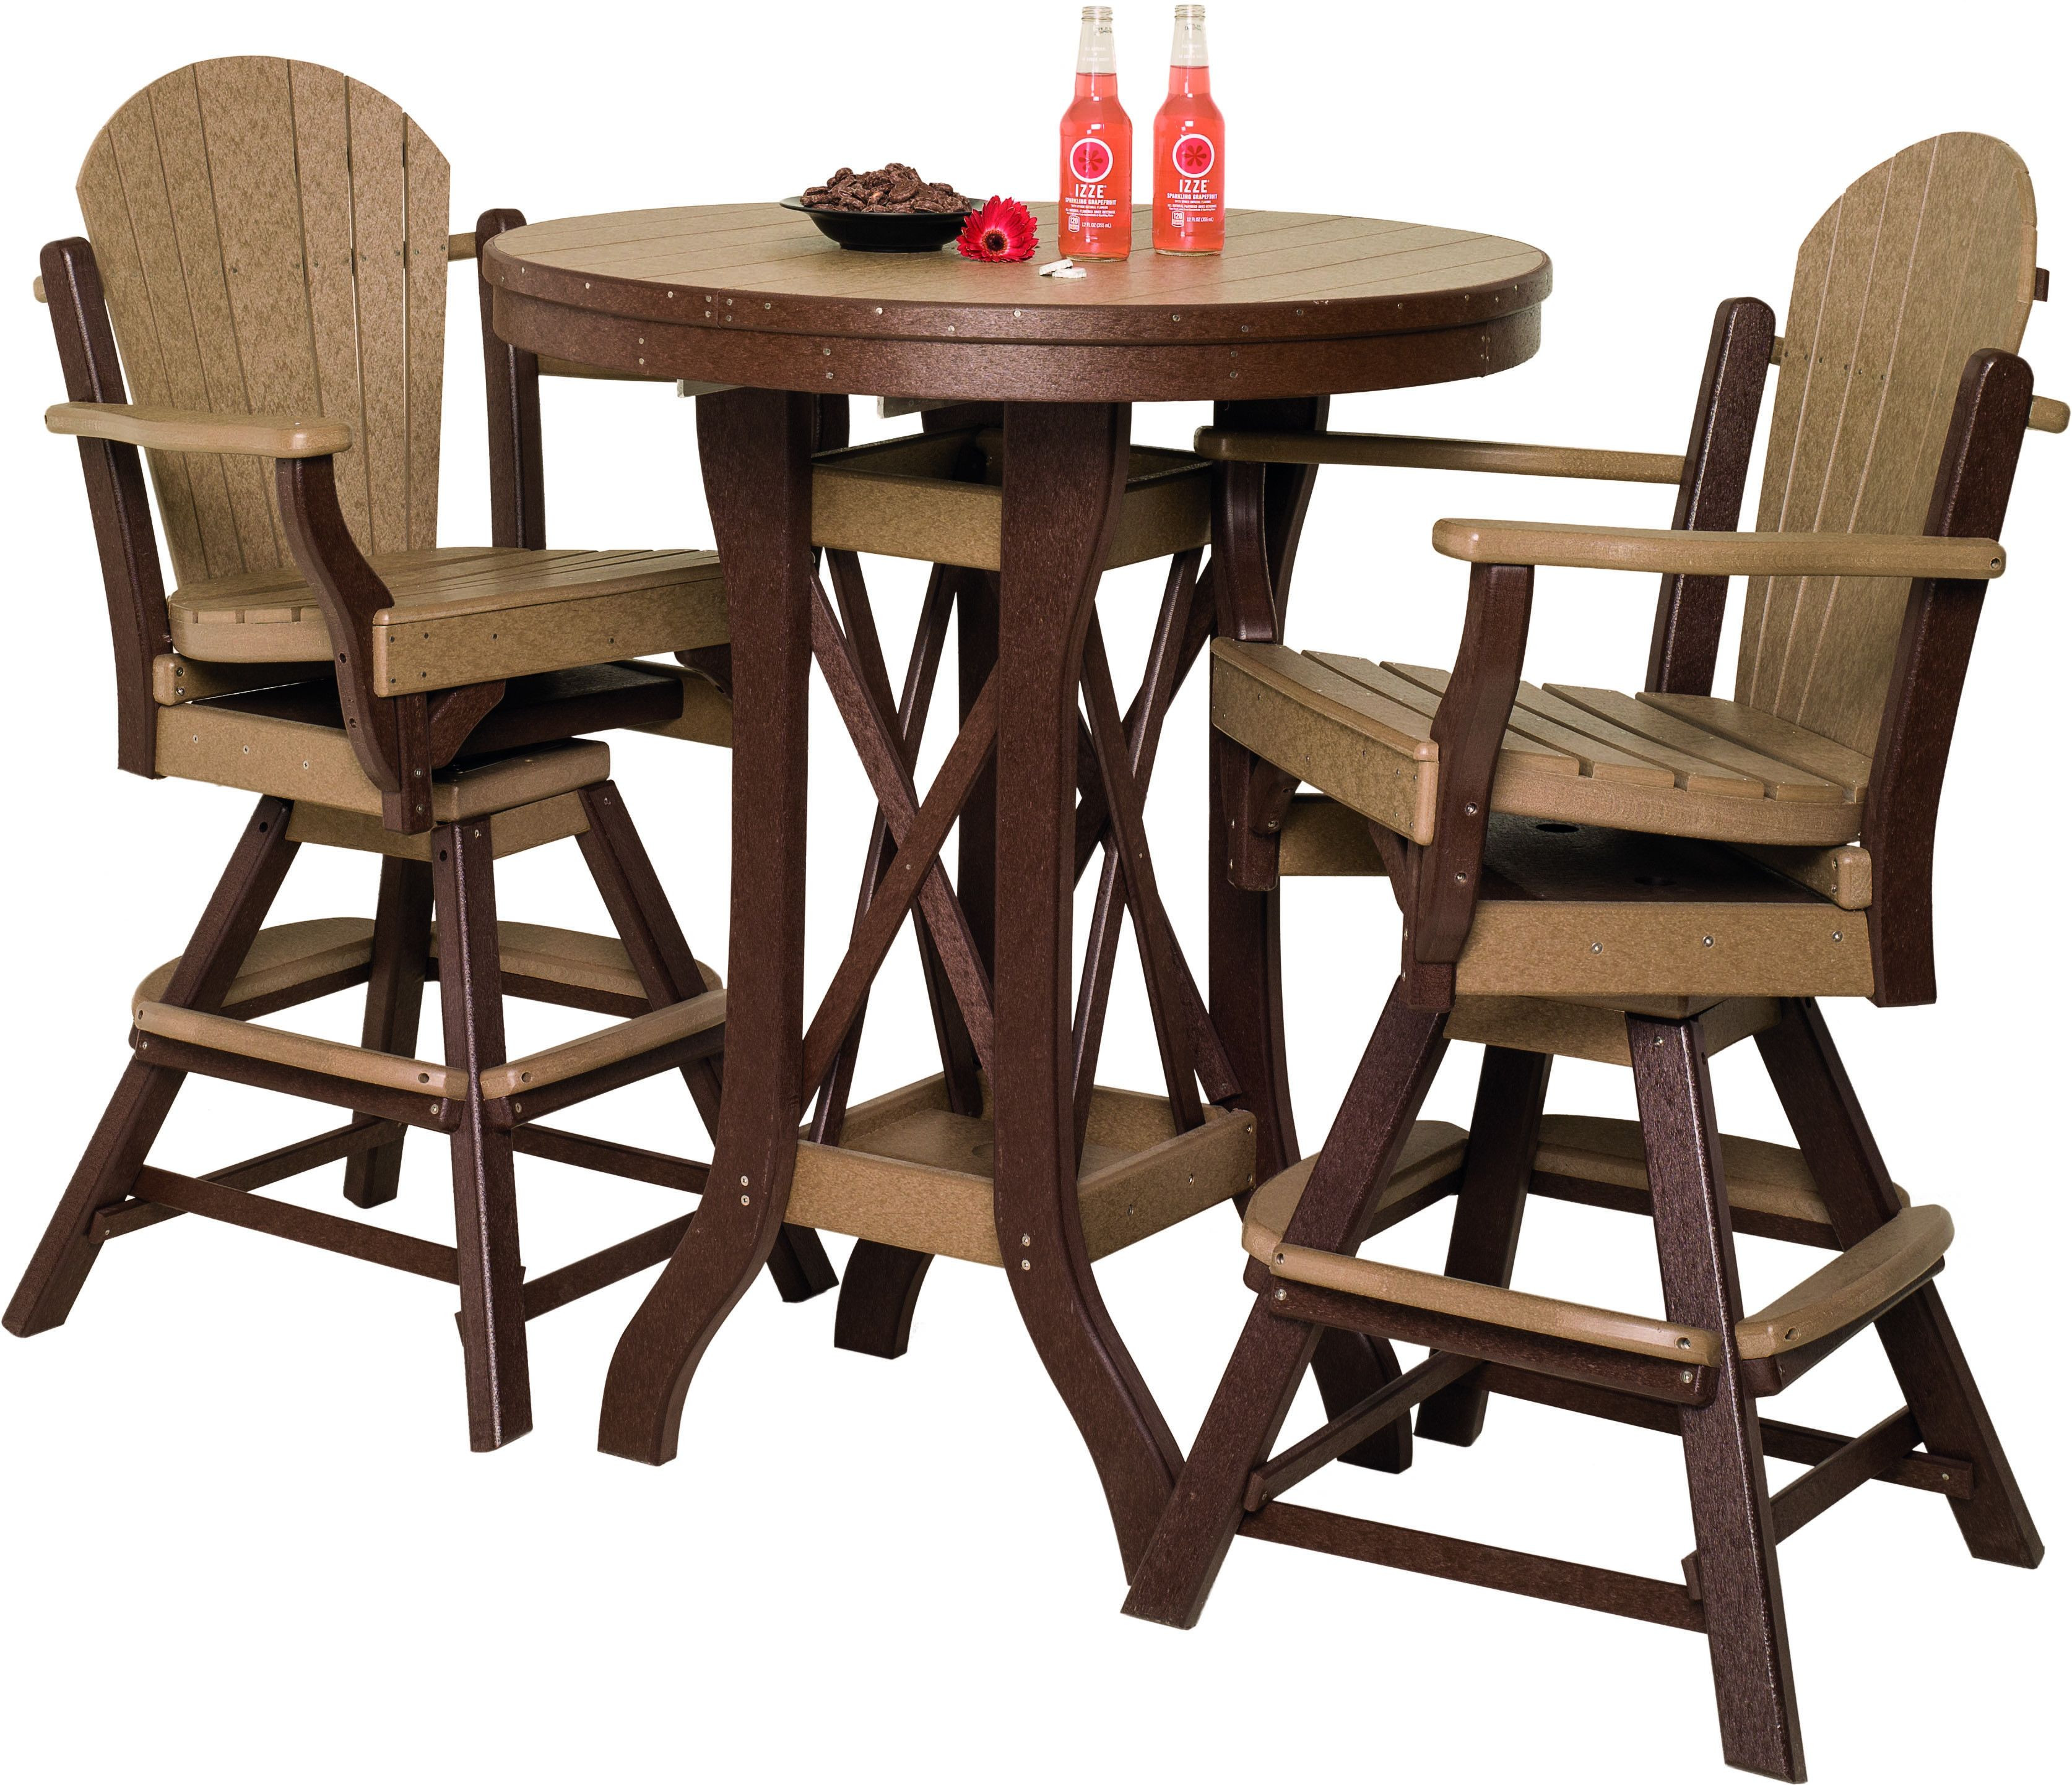 Recycled Poly Pub Table and Swivel Bar Seats | Barn furniture, Durable